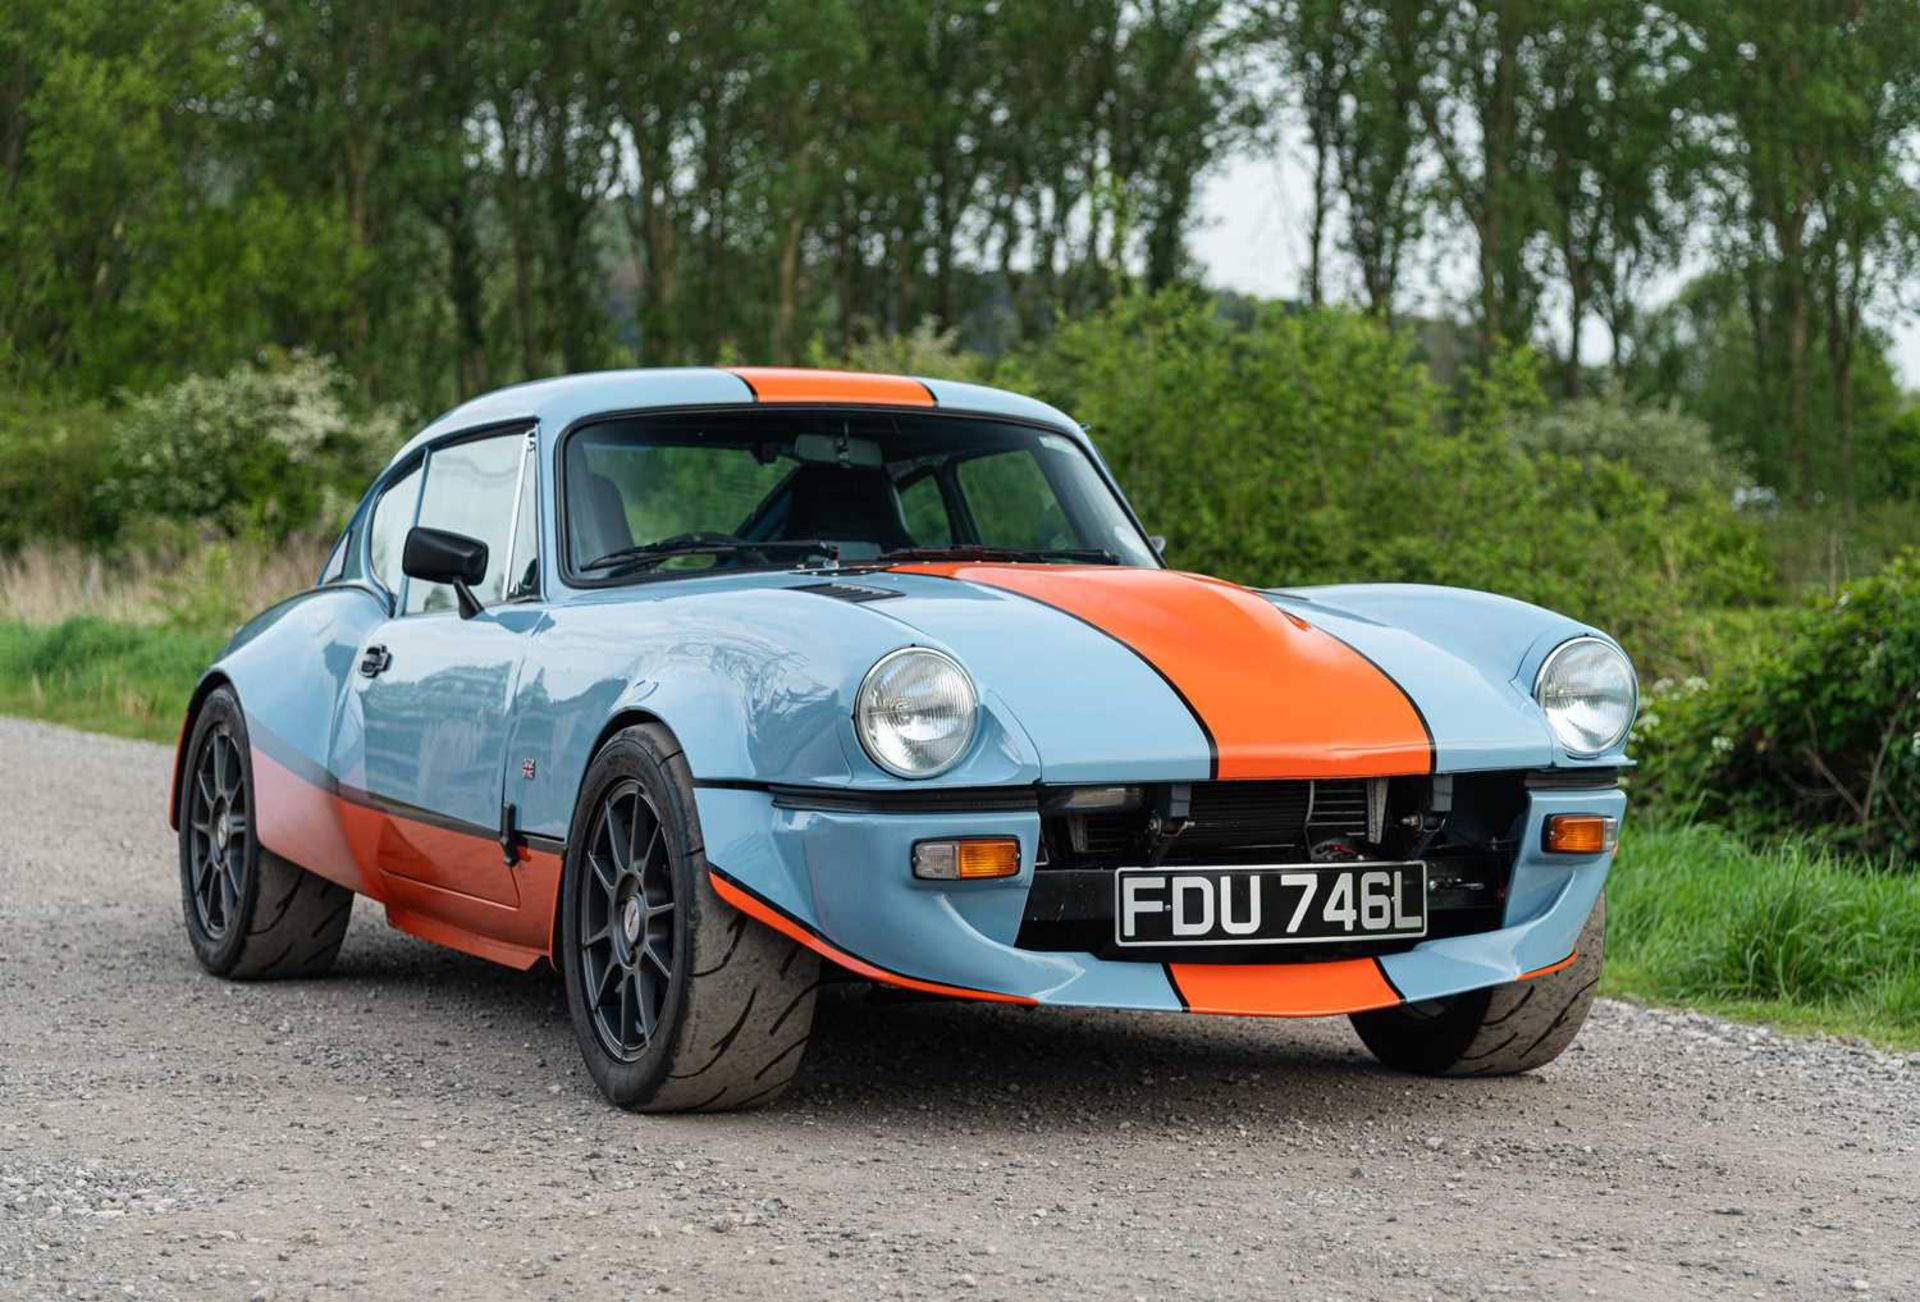 1973 Triumph GT6  ***NO RESERVE*** Presented in Gulf Racing-inspired paintwork, road-going track wea